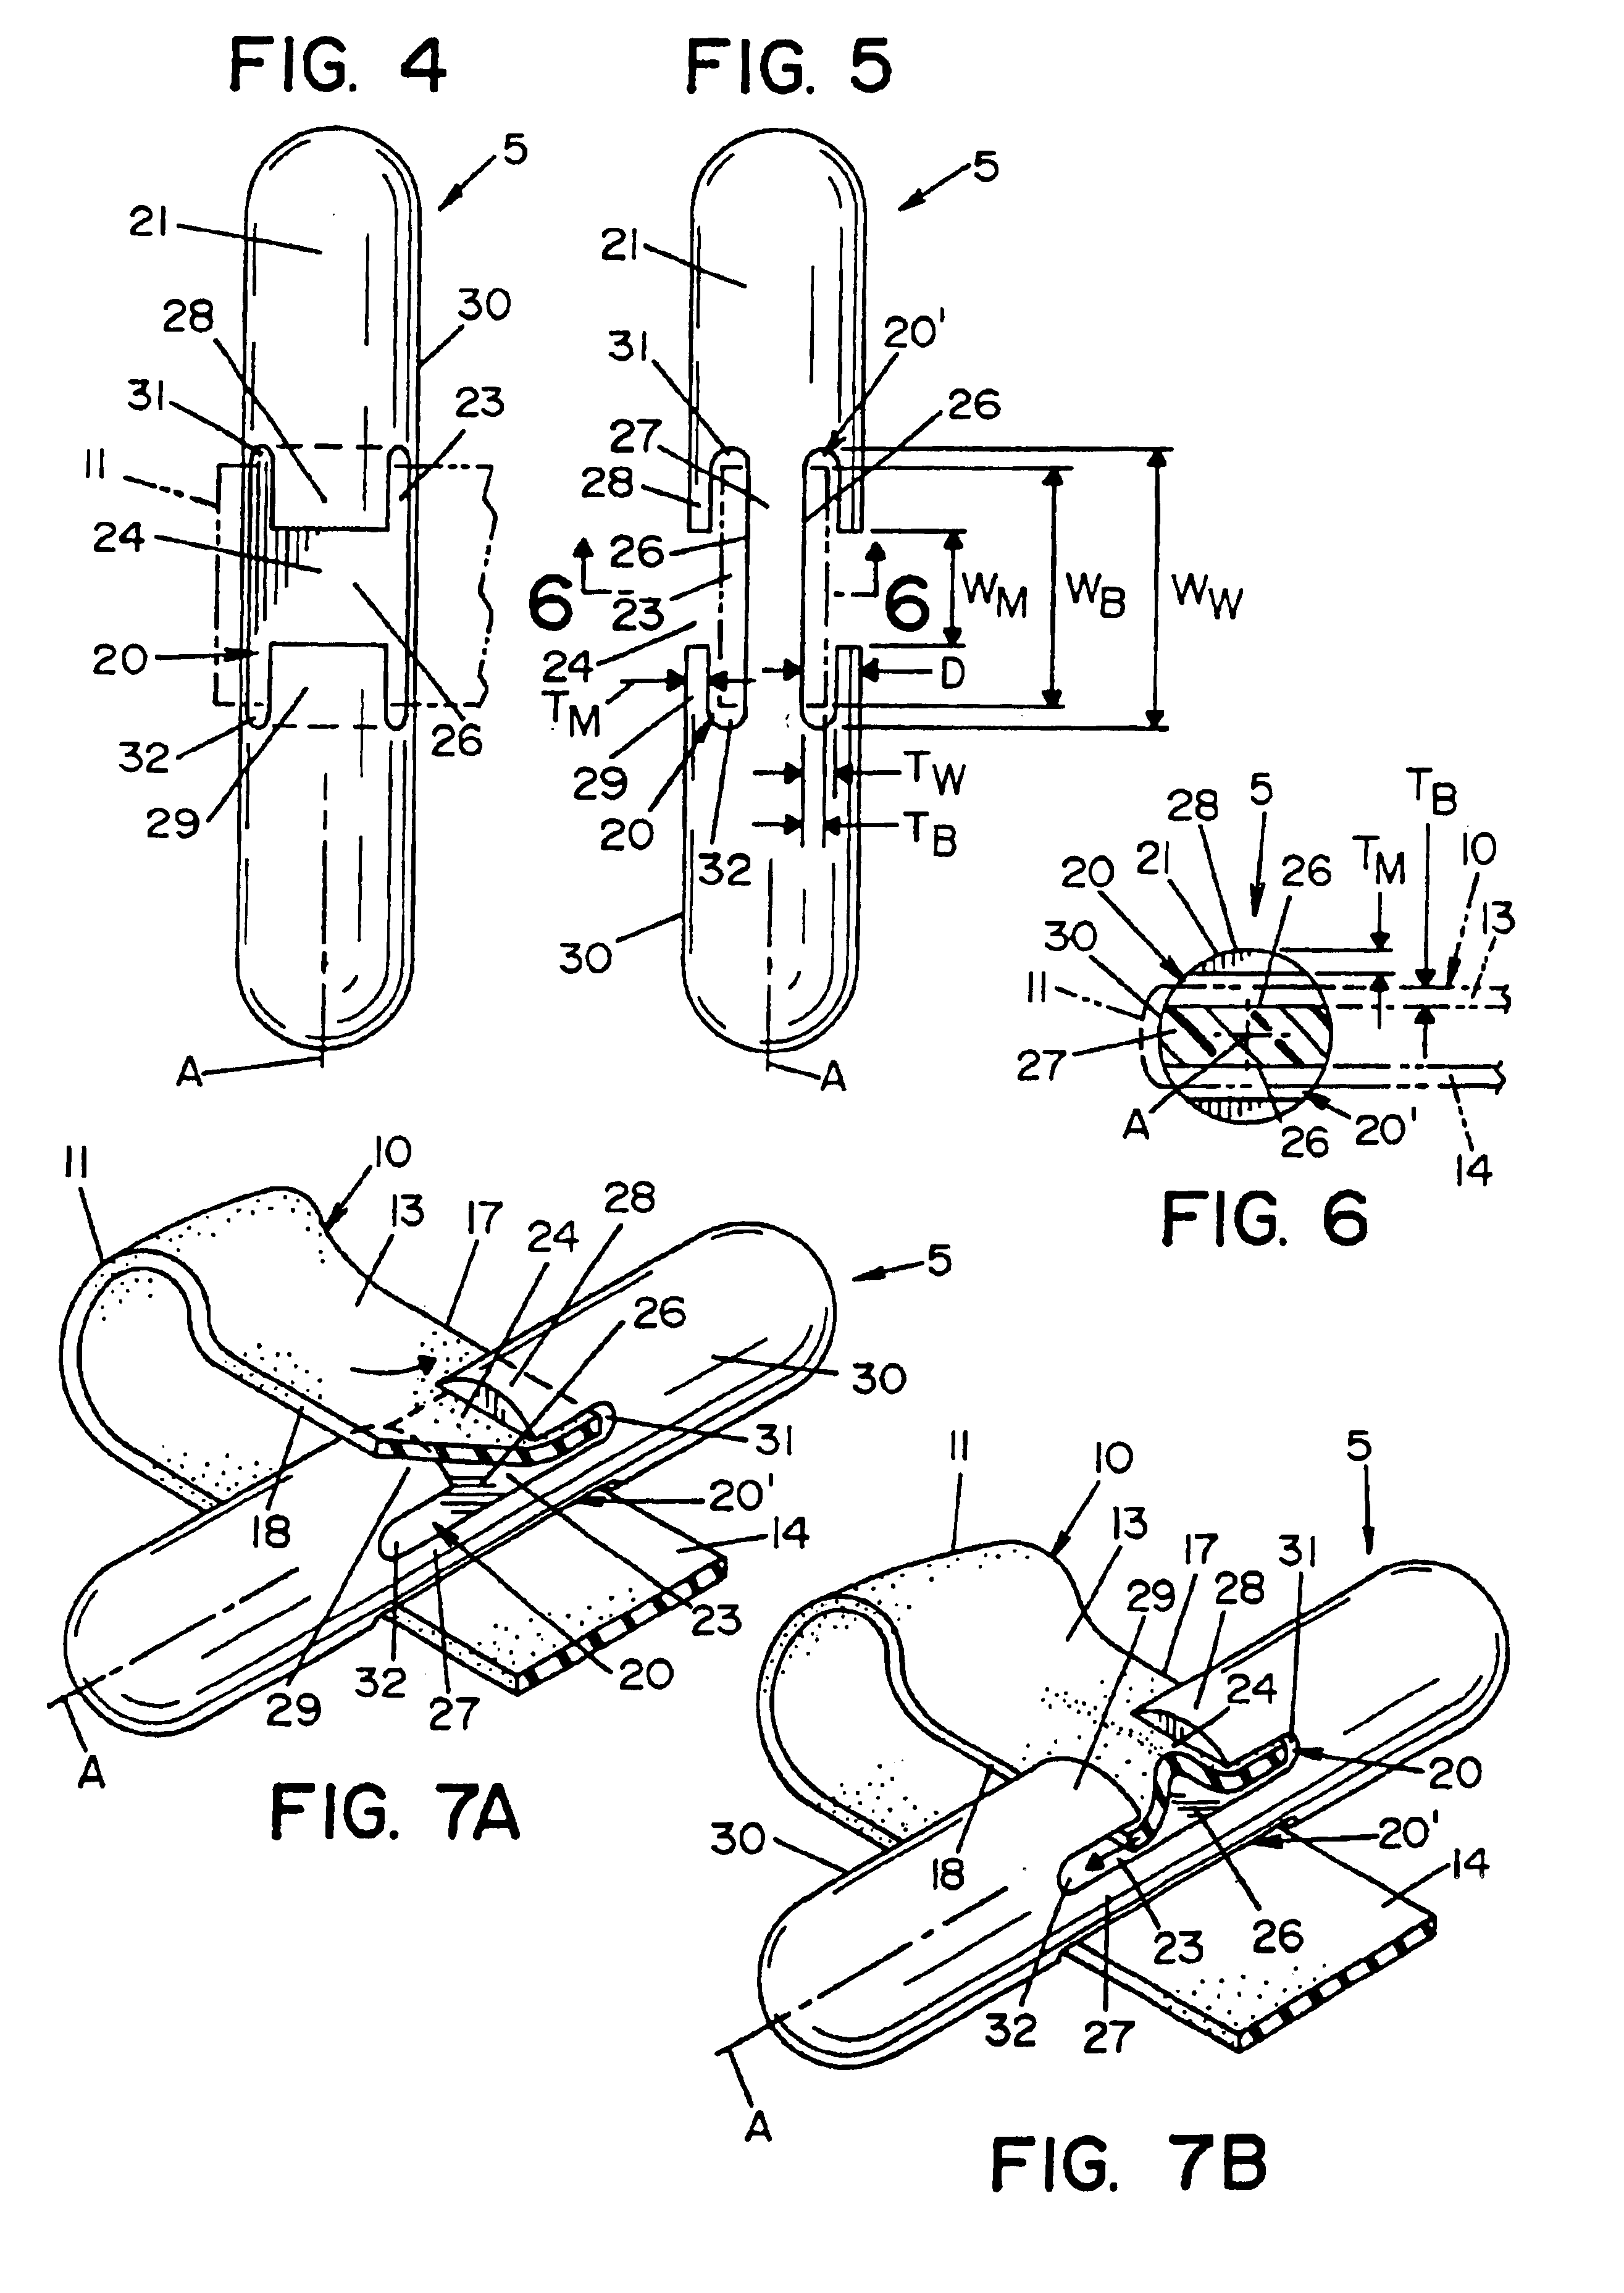 Rubber band retainer apparatus